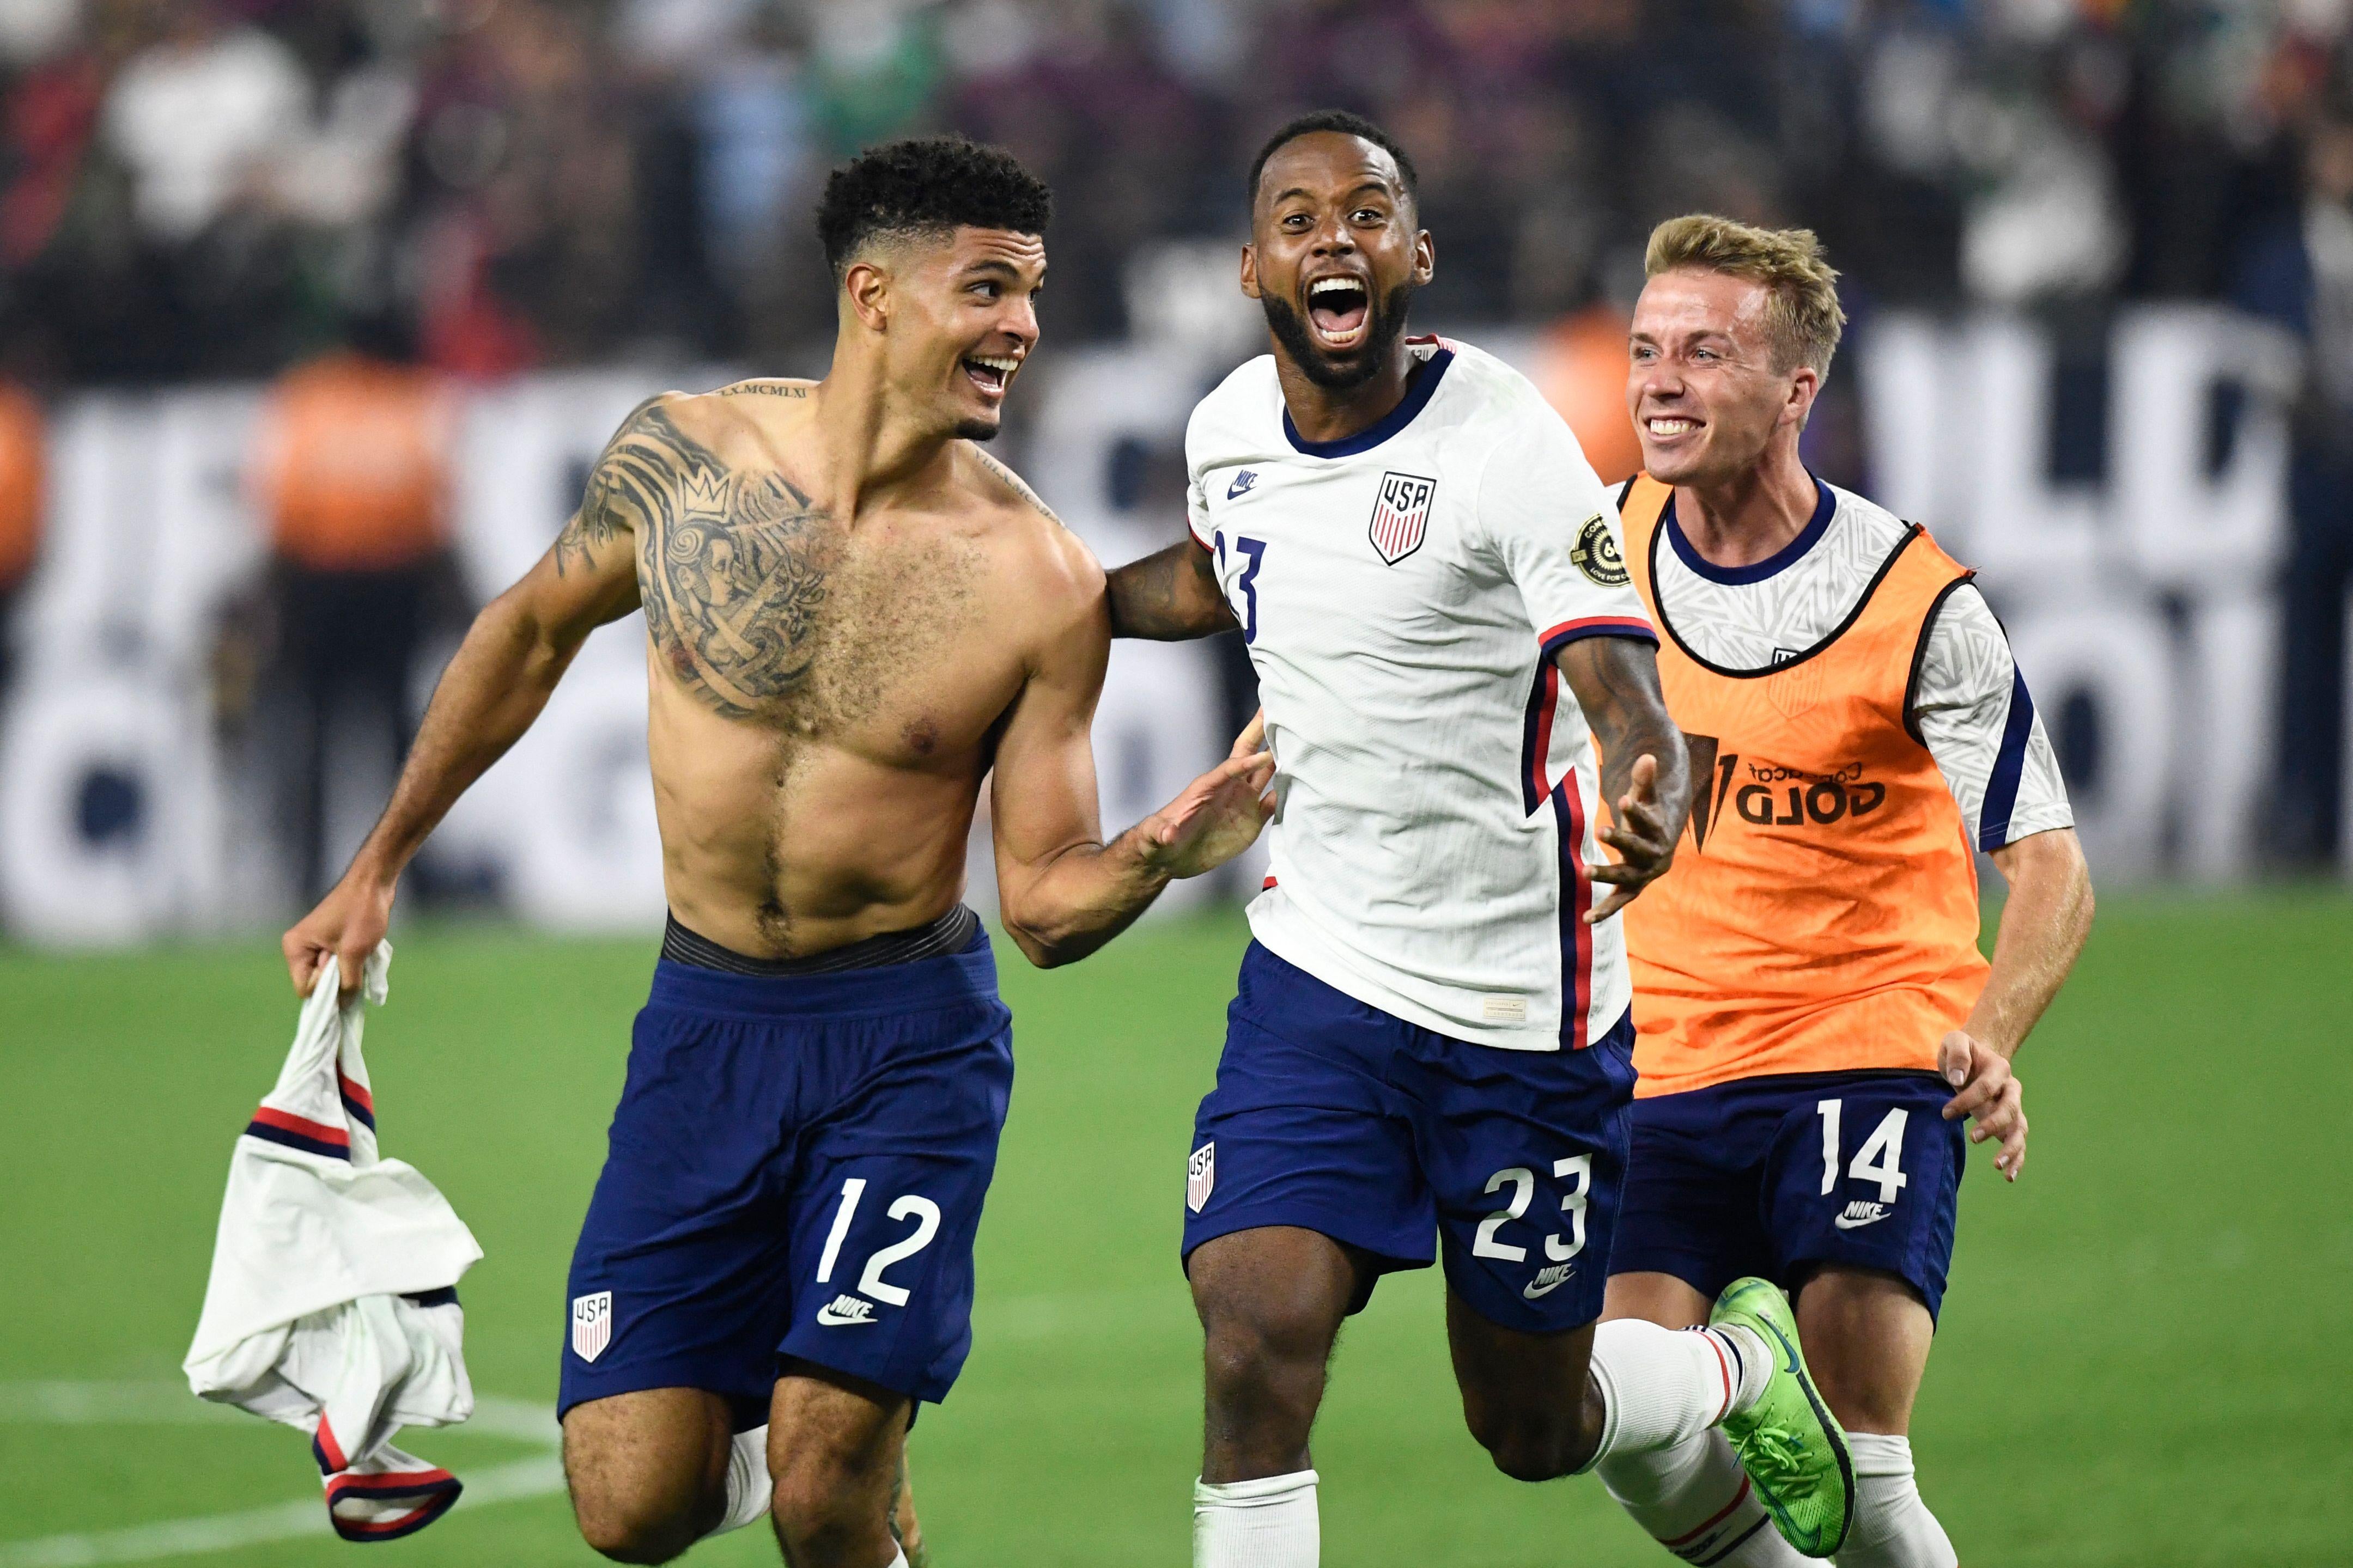 Shirtless and tattooed Miles Robinson, screaming Kellyn Acosta, and smiling Jackson Yueill run, embrace, and celebrate on the pitch.